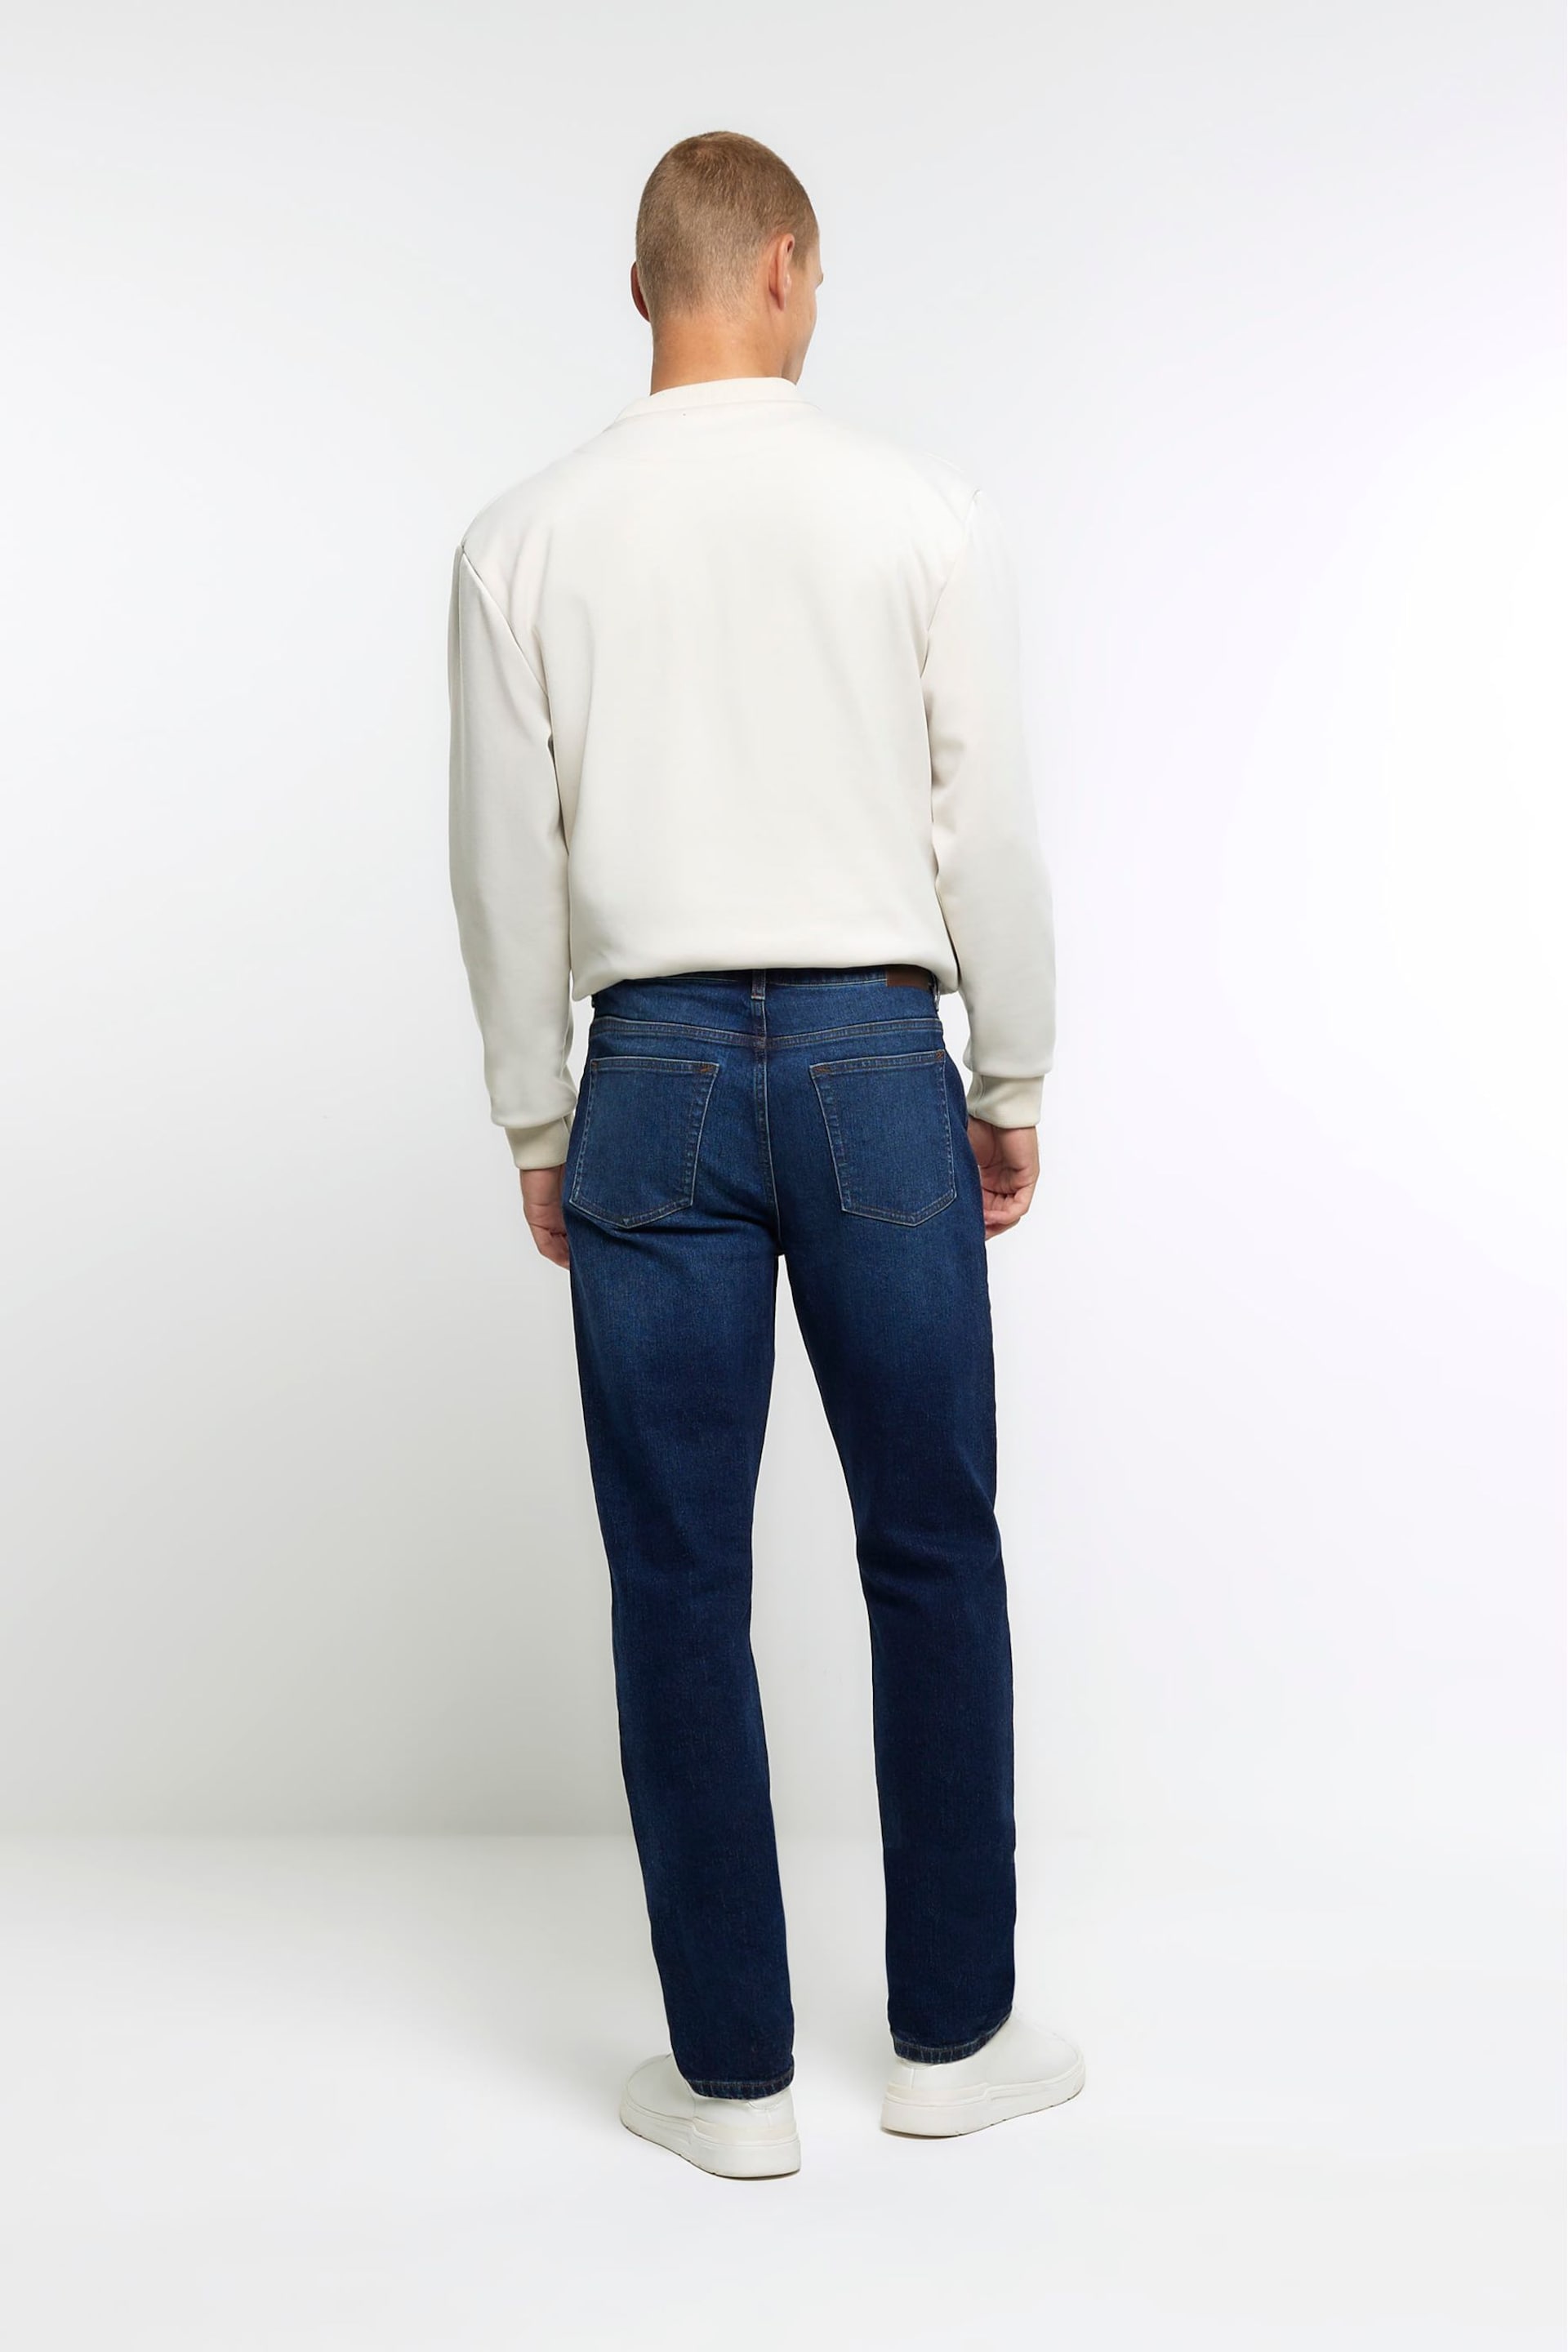 River Island Blue Slim Fit Jeans - Image 2 of 3